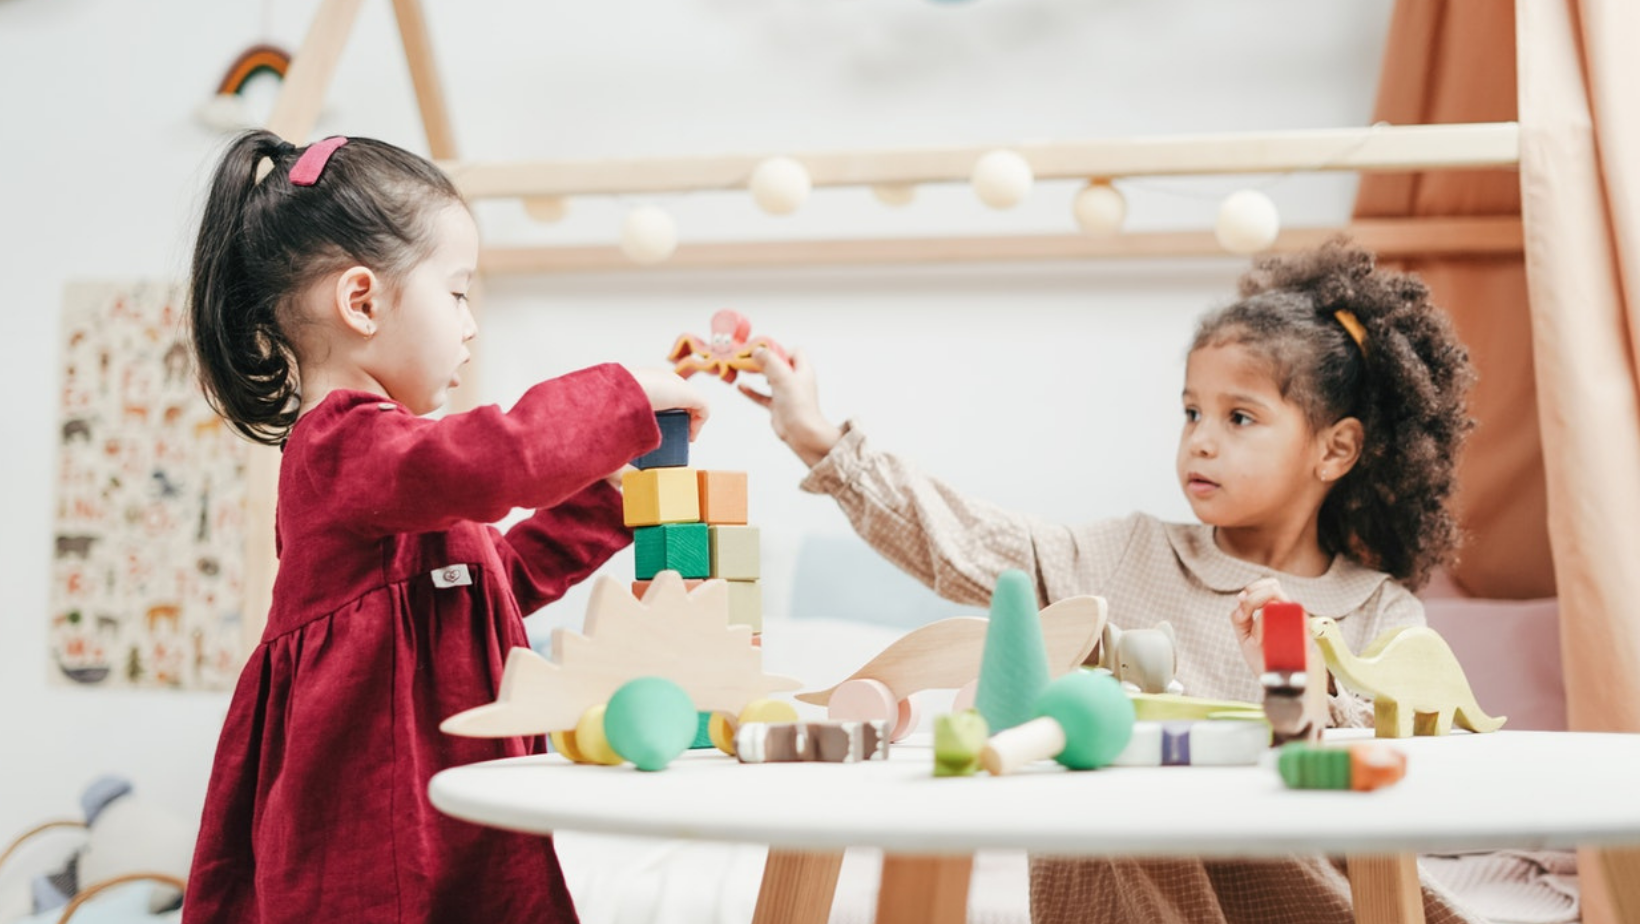 How to help develop your child’s pretend play skills